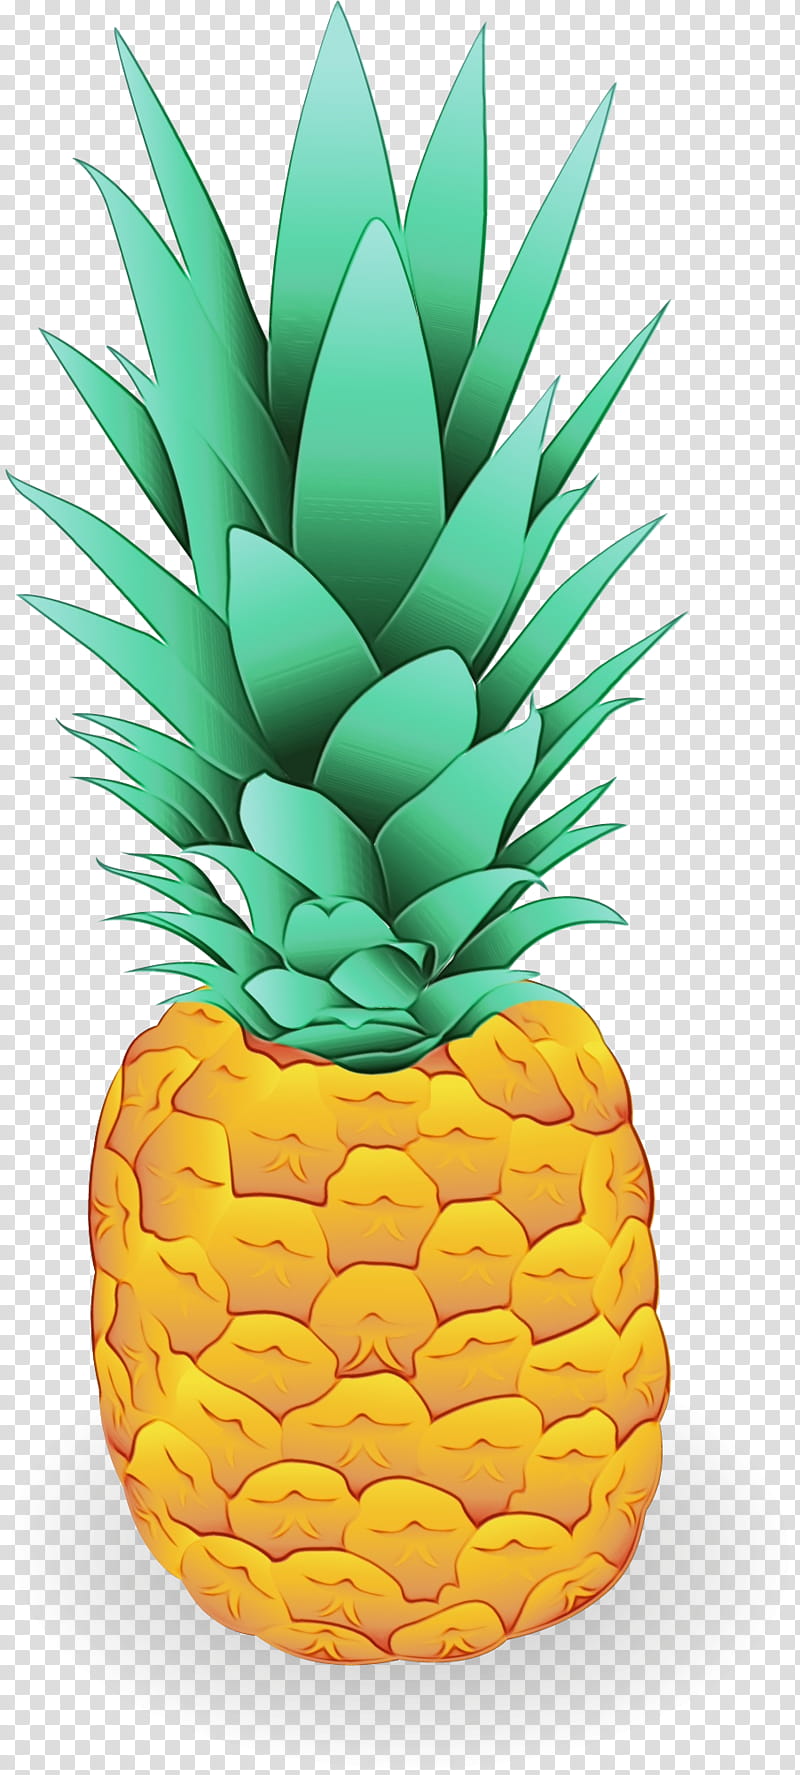 Pineapple Watercolor Paint Wet Ink Ananas Fruit Plant Food Transparent Background Png